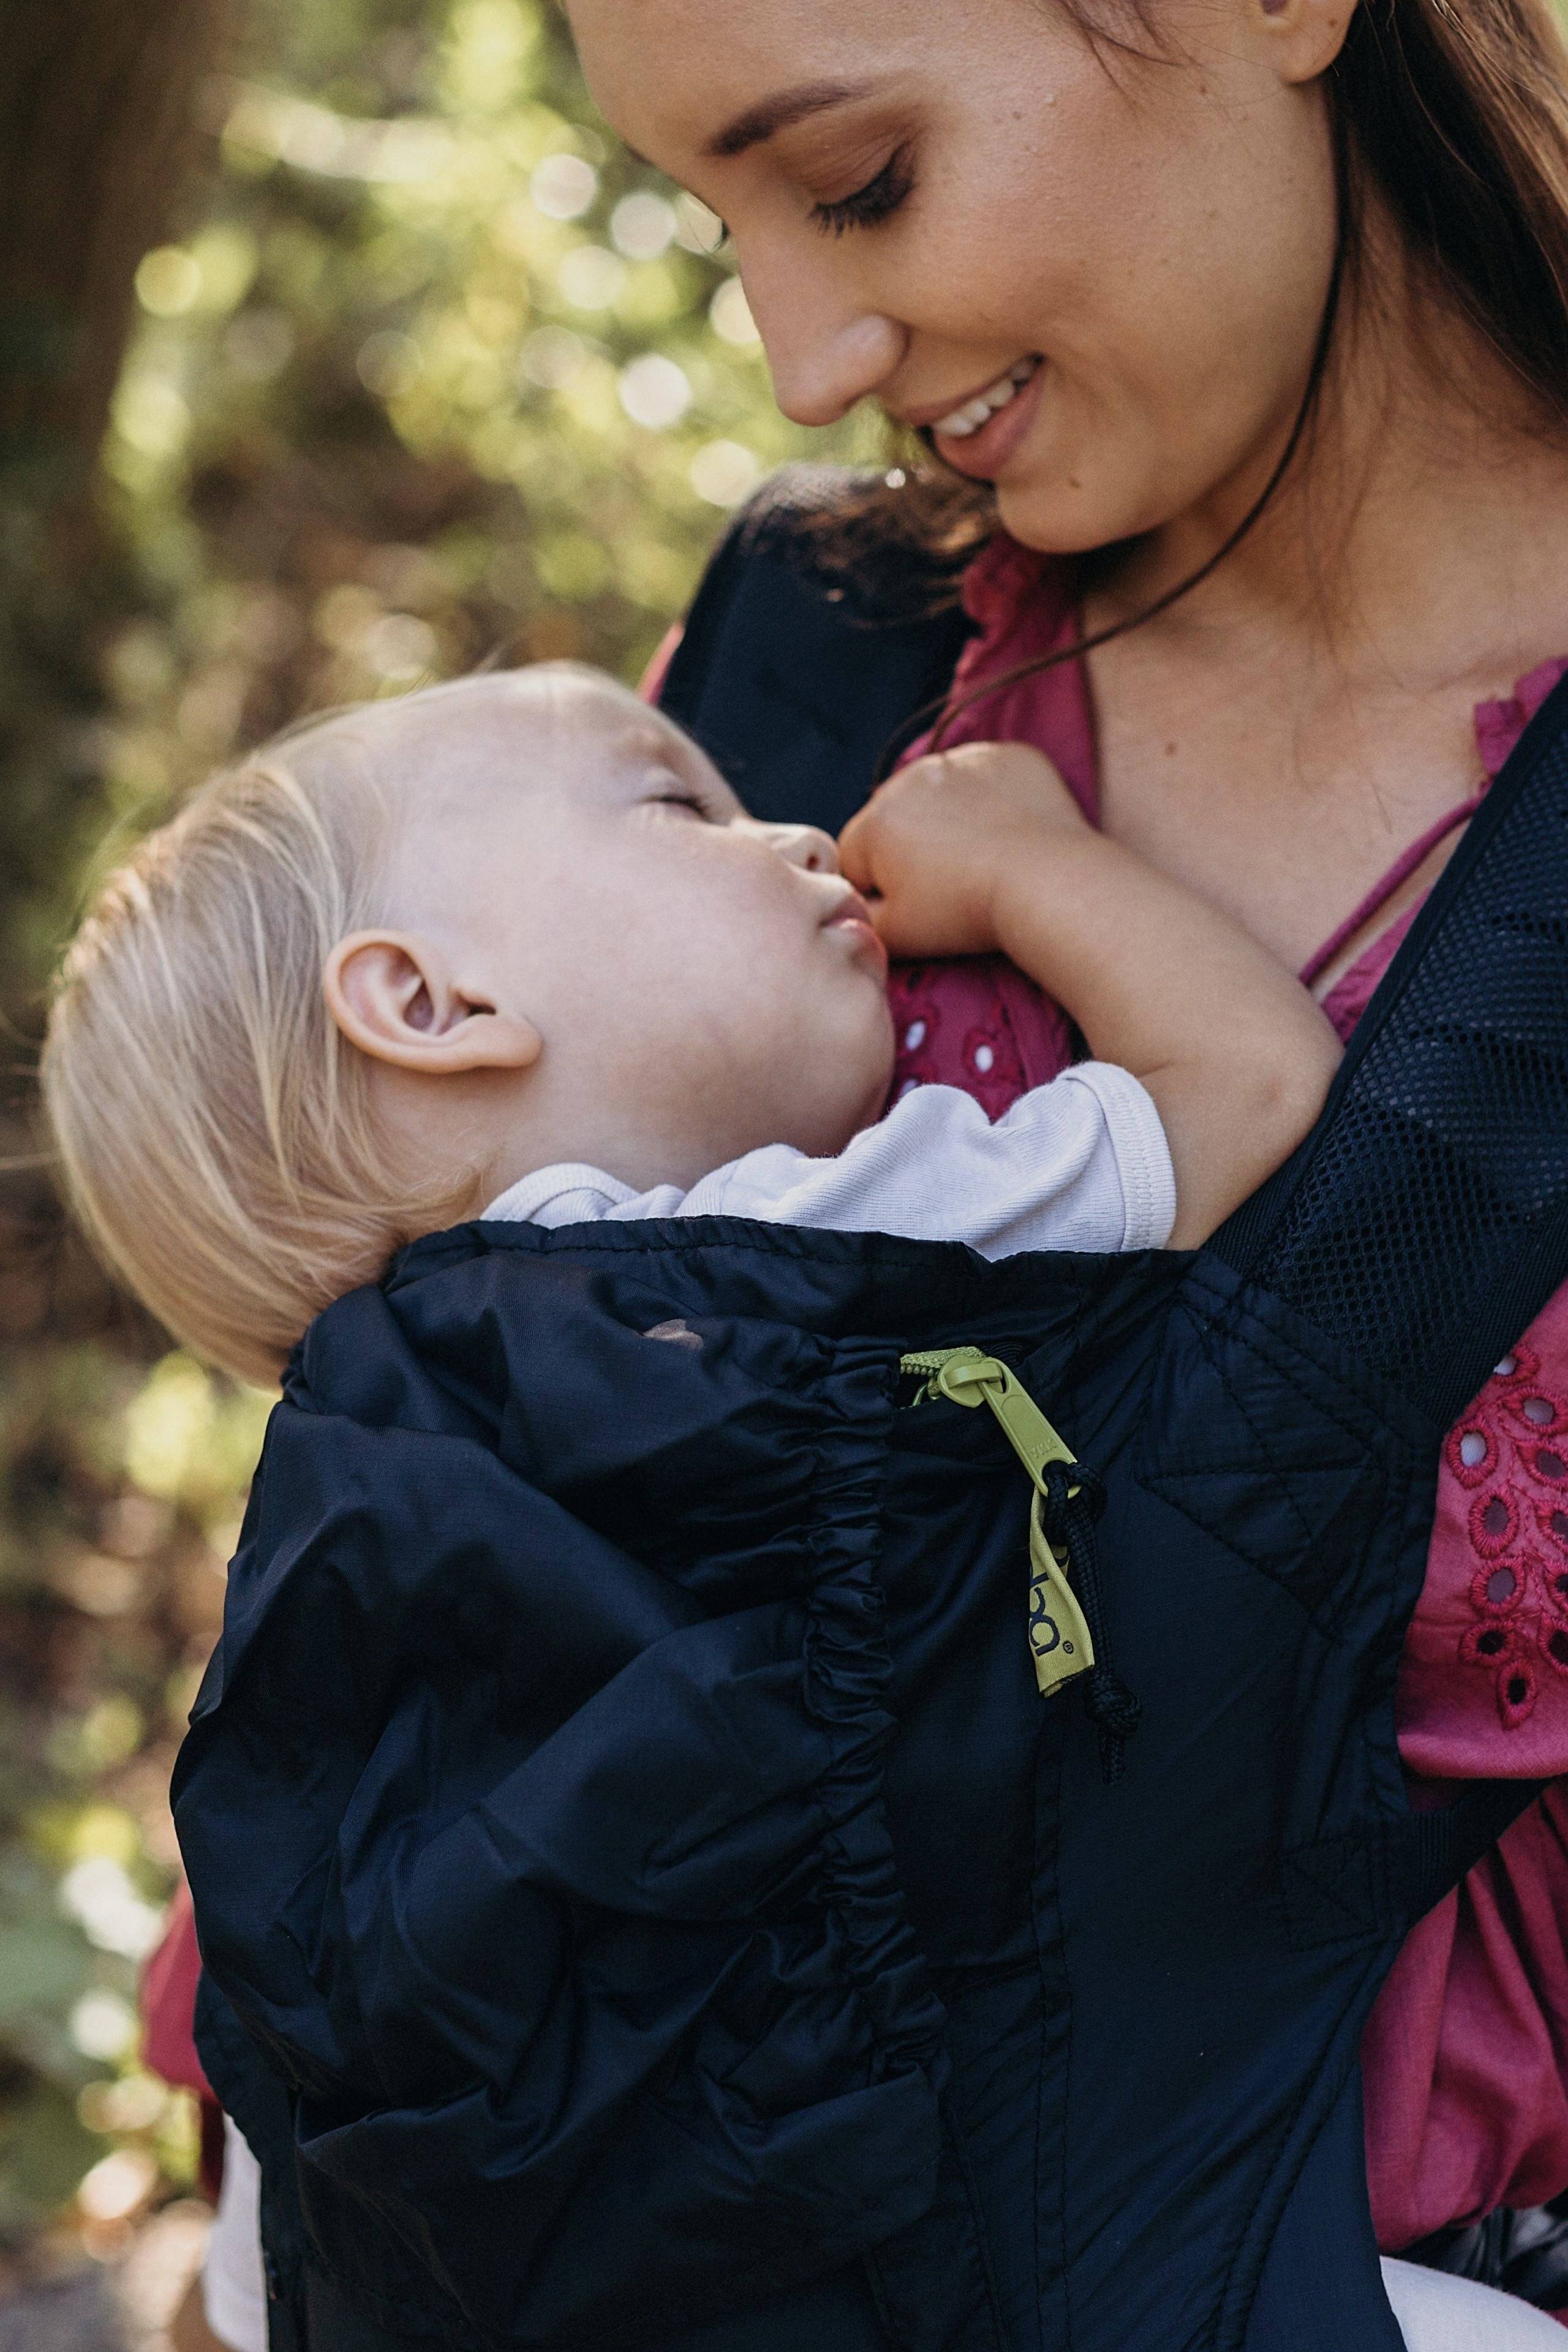 Discover our space-saving and perfectly designed Boba Air Black baby carrier that makes your travels with your little one a breeze! Our ergonomic and lightweight model is designed to carry babies from 4 months up to 45 lbs so you can experience convenience and ease on-the-go!